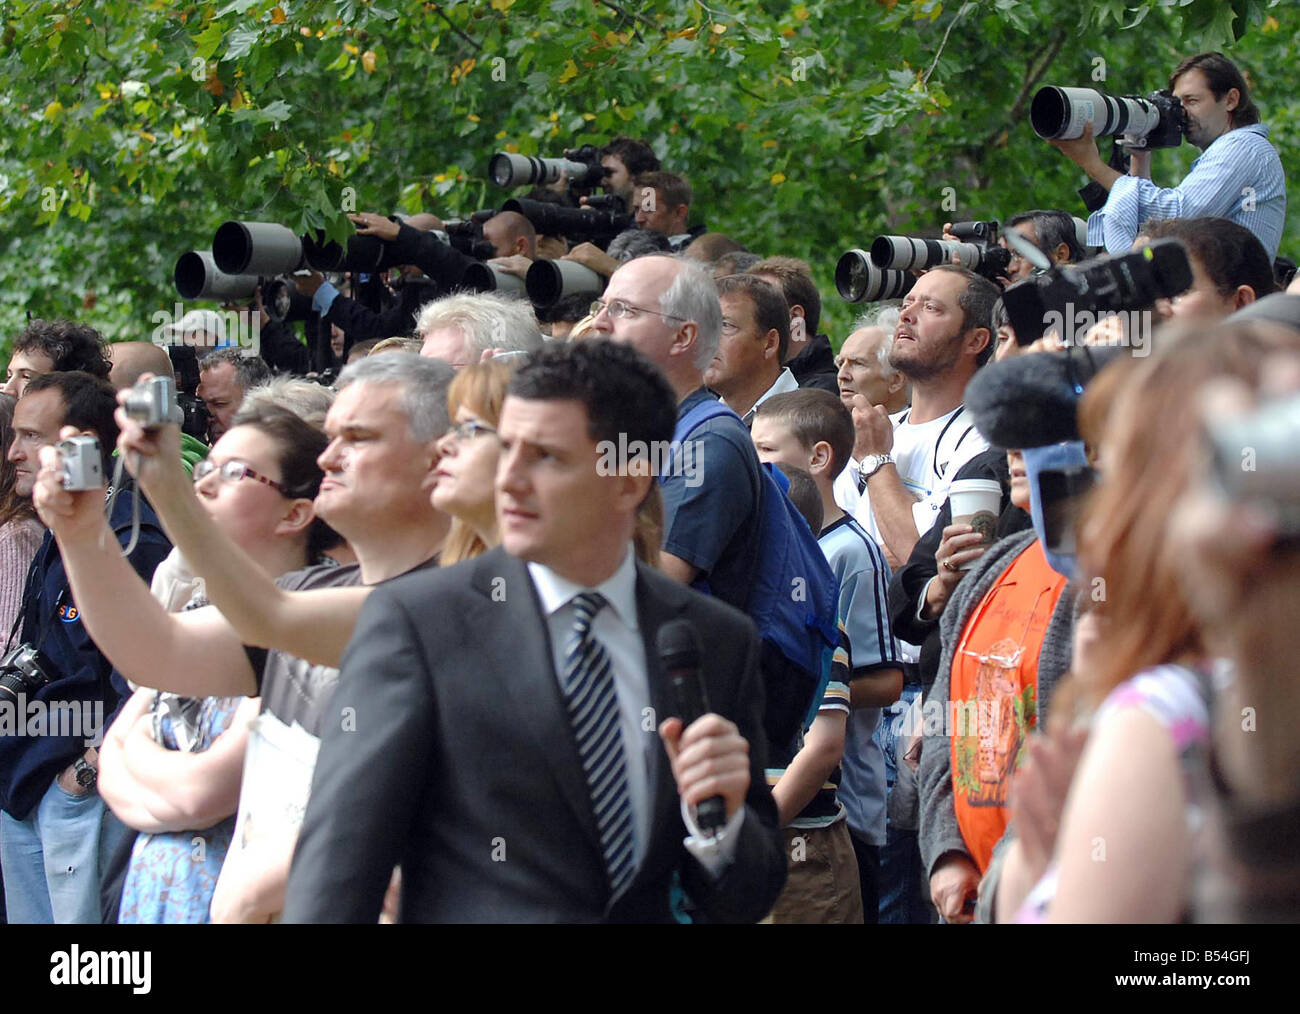 Members of the Media outside the Guards' Chapel in London on the 10th anniversary of Princess Diana's death. Stock Photo